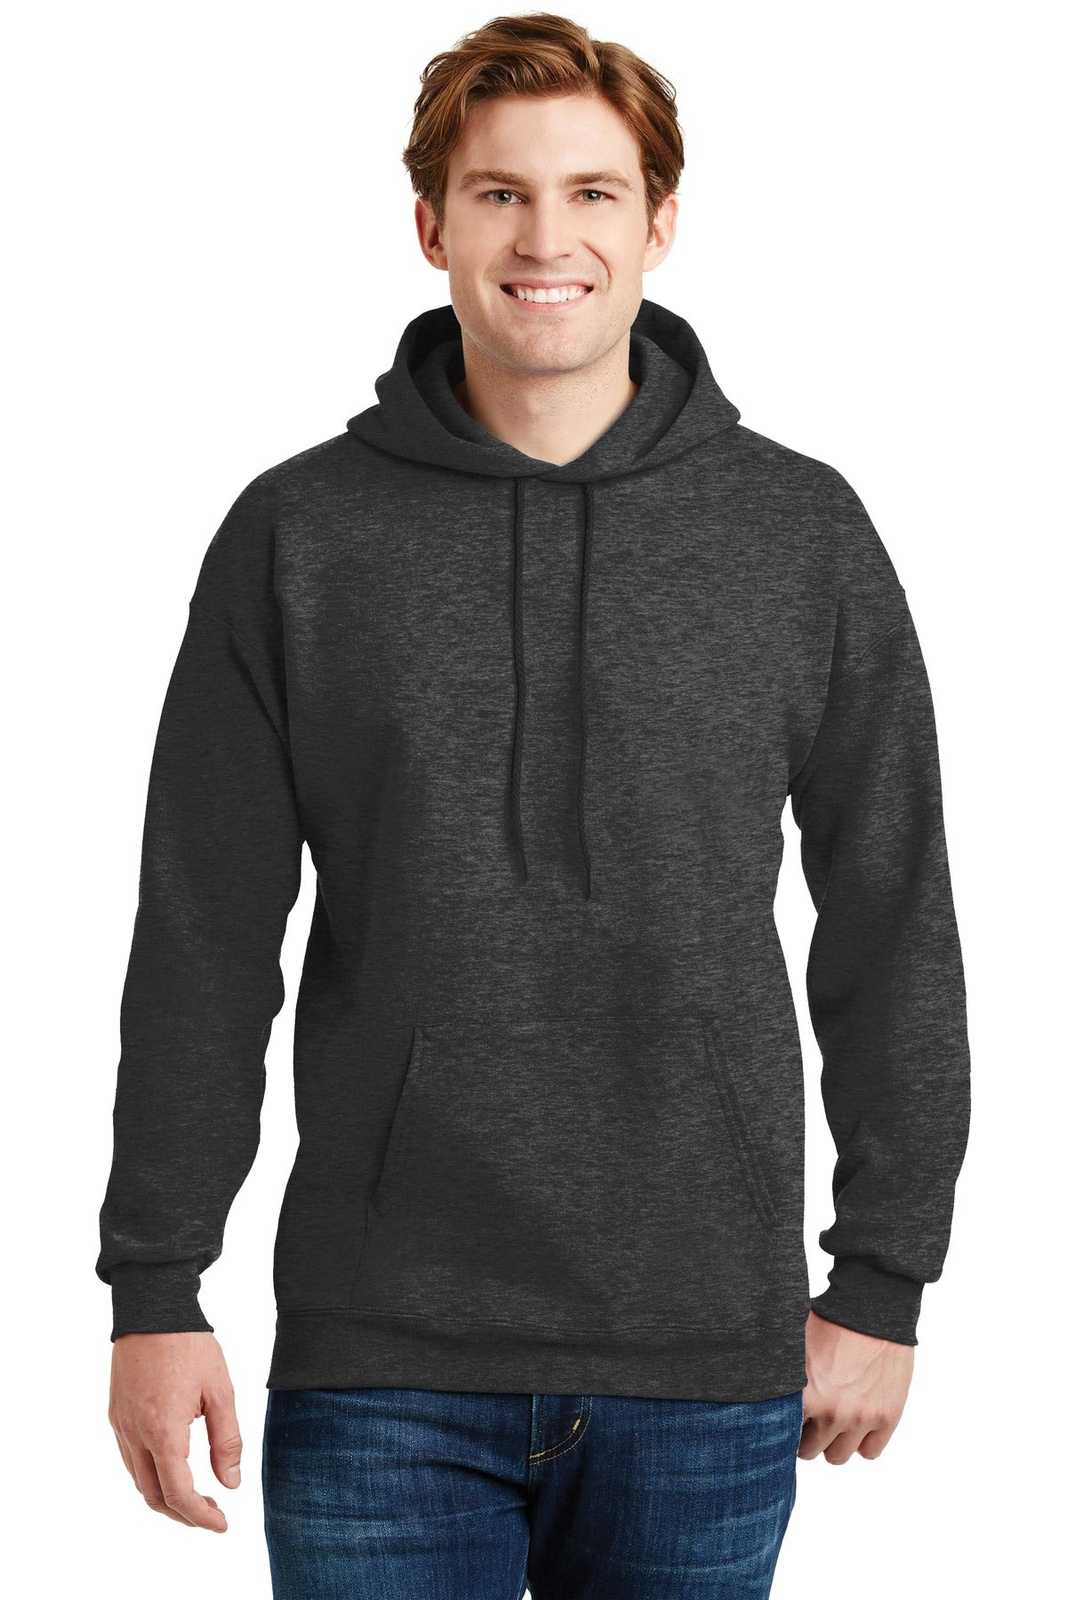 Hanes F170 Ultimate Cotton Pullover Hooded Sweatshirt - Charcoal Heather - HIT a Double